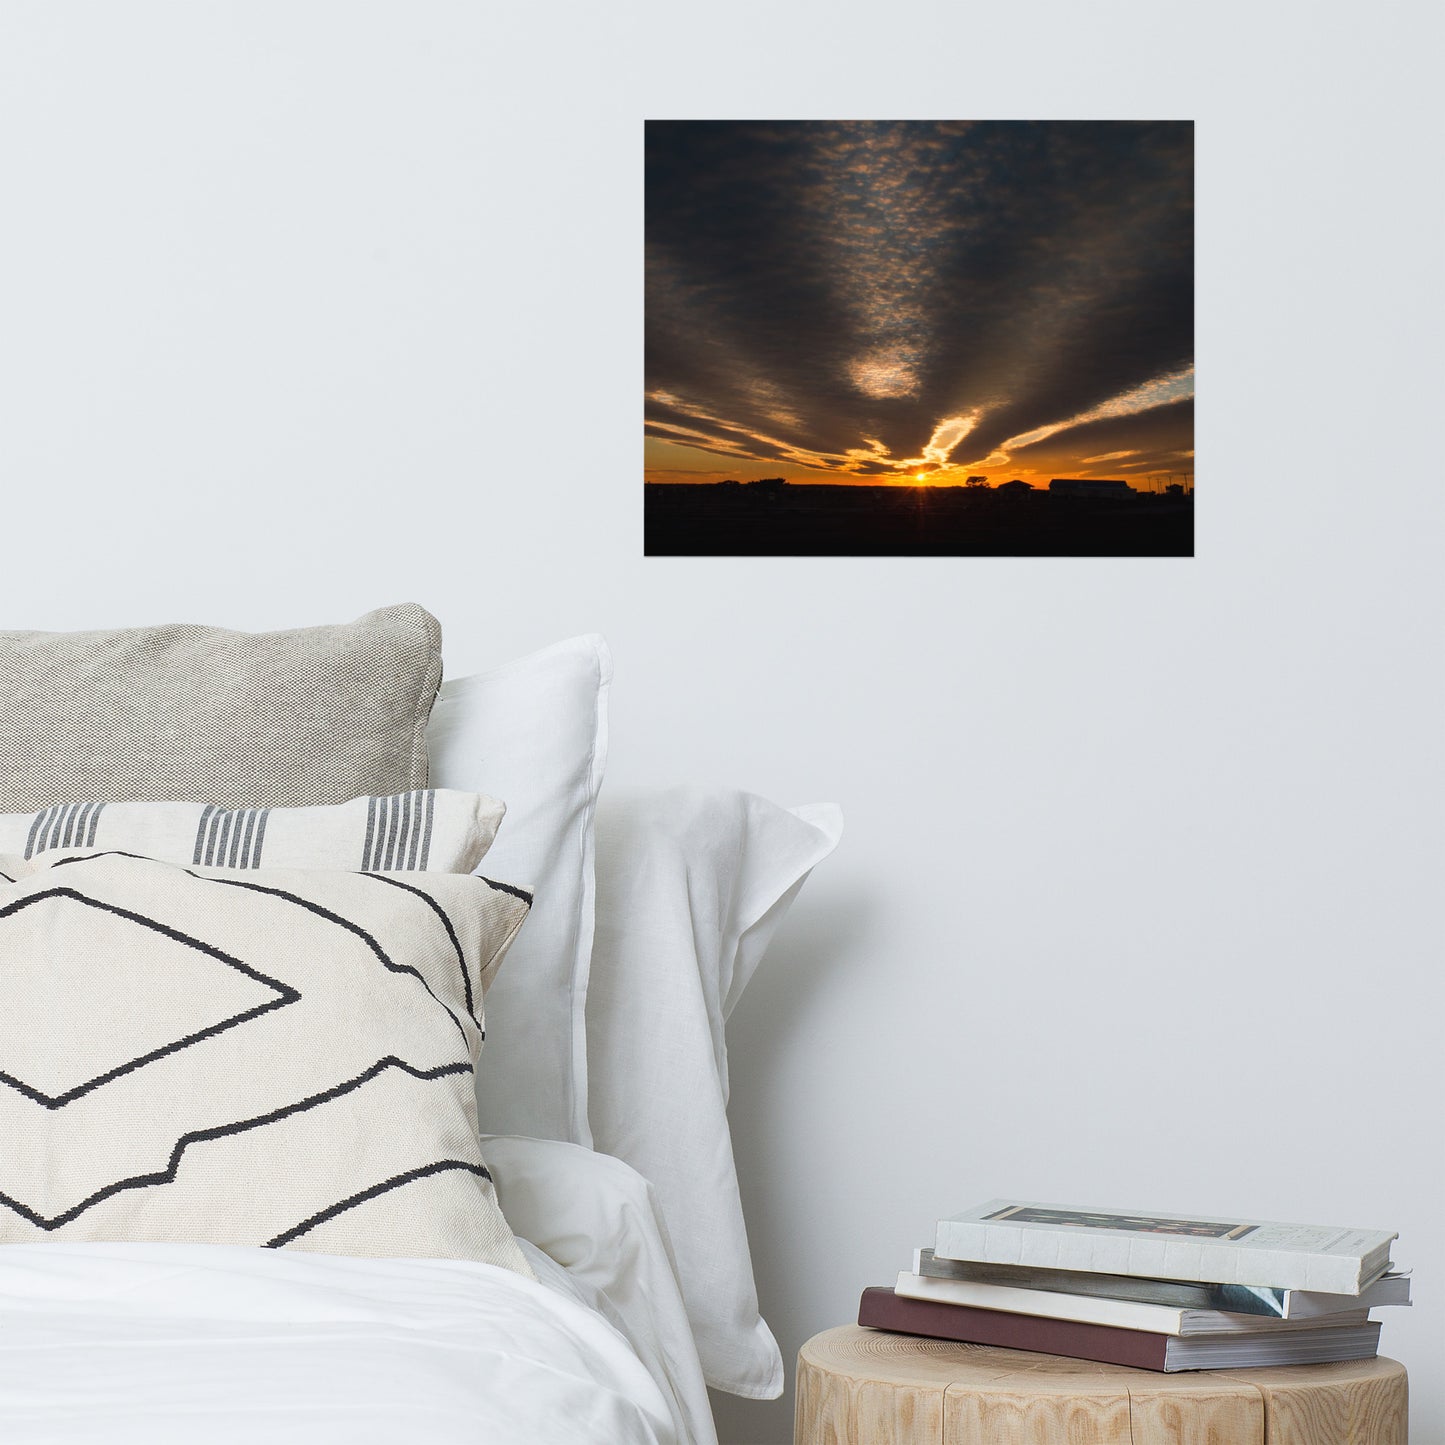 Sunset Indian River Inlet Landscape Photo Loose Wall Art Prints